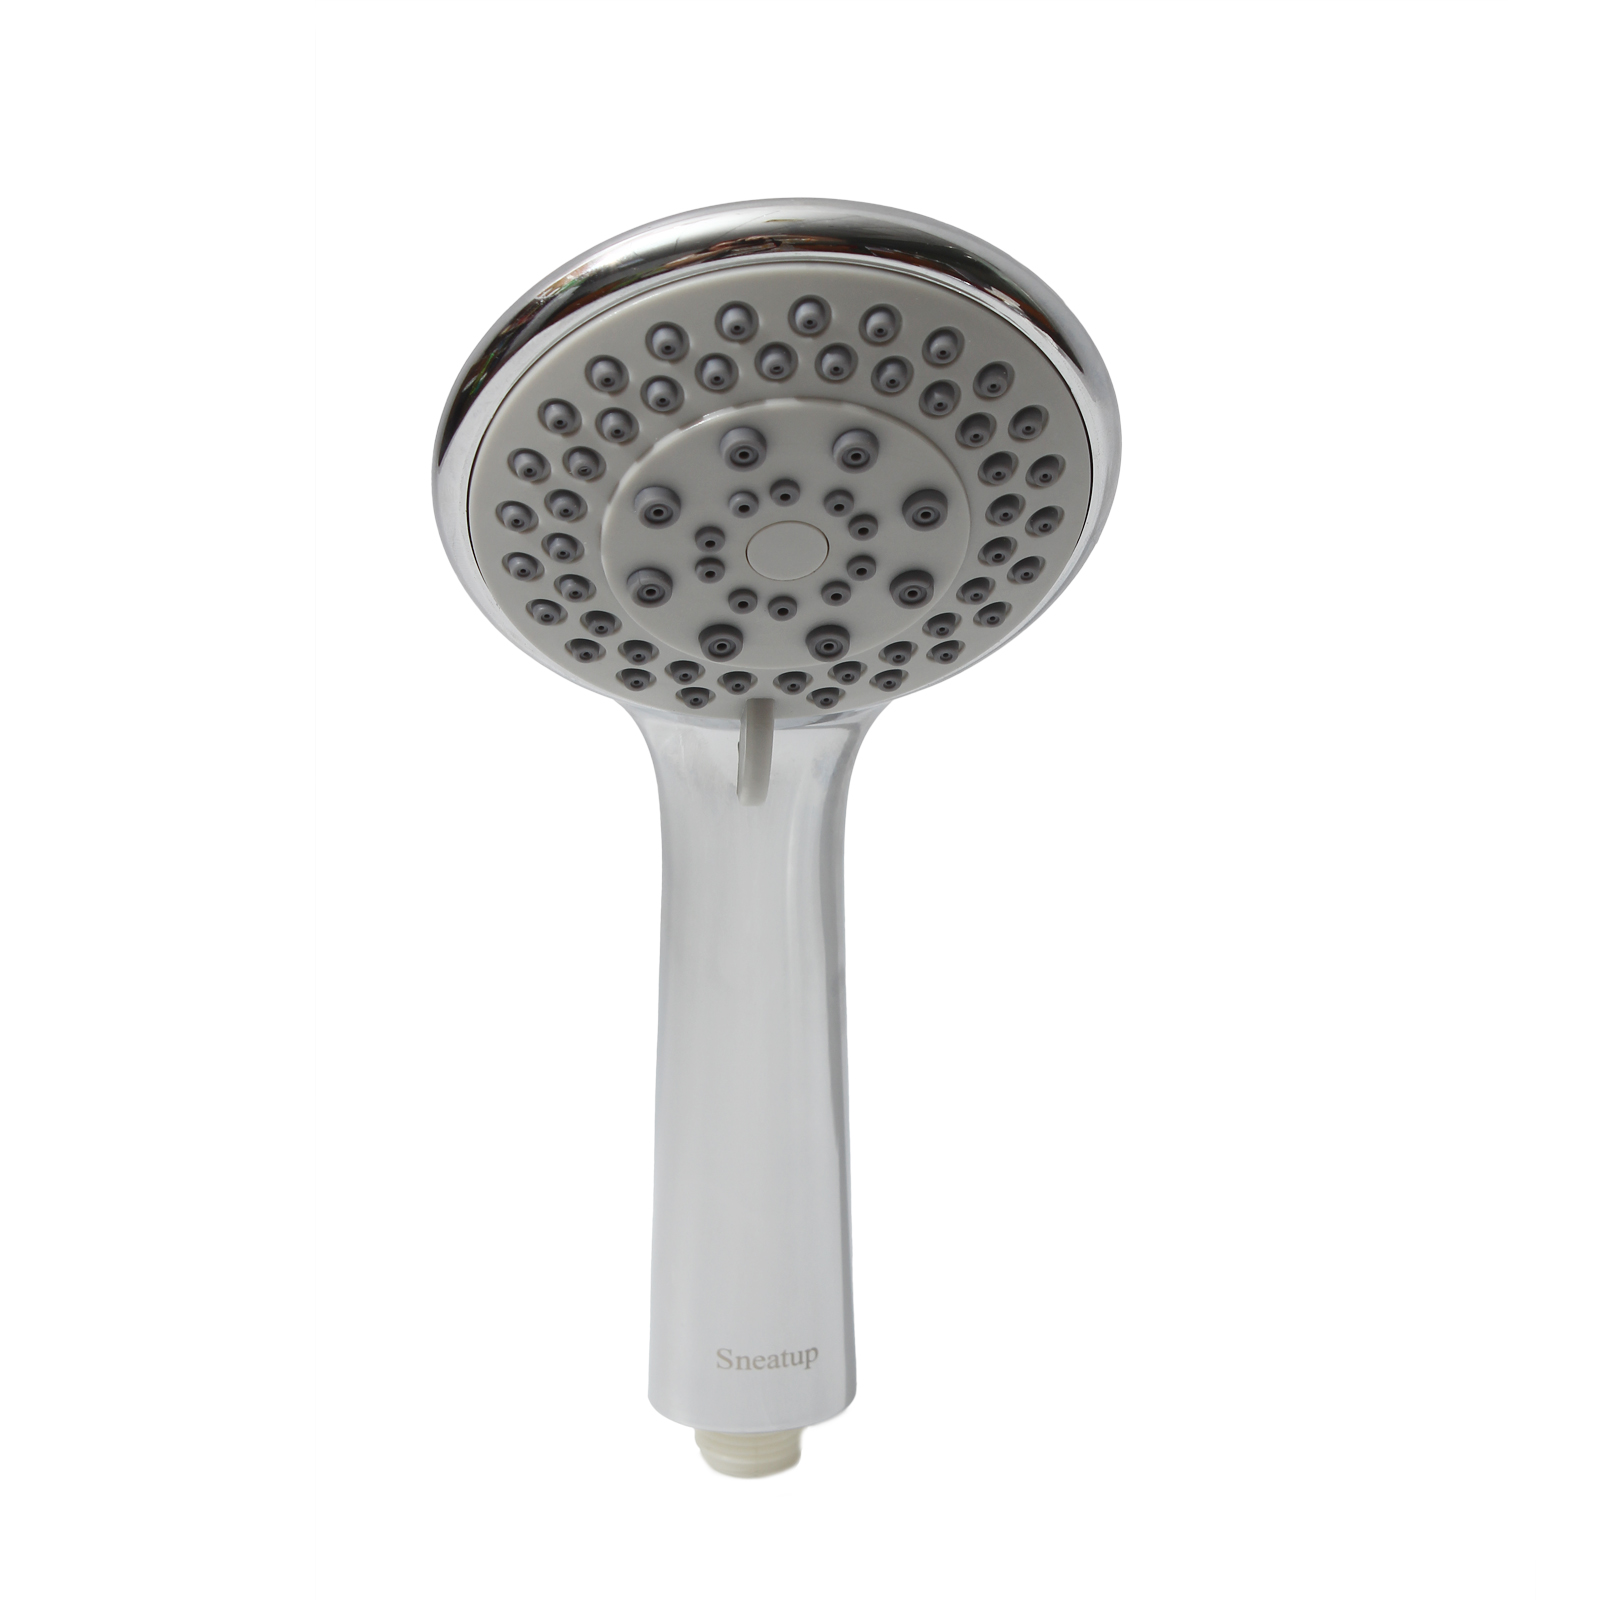 Sneatup Hand-held showers，High Pressure Shower Head, Universal Handheld Shower Double Boost Pressure Design for Low Water Pressure 4 Spray